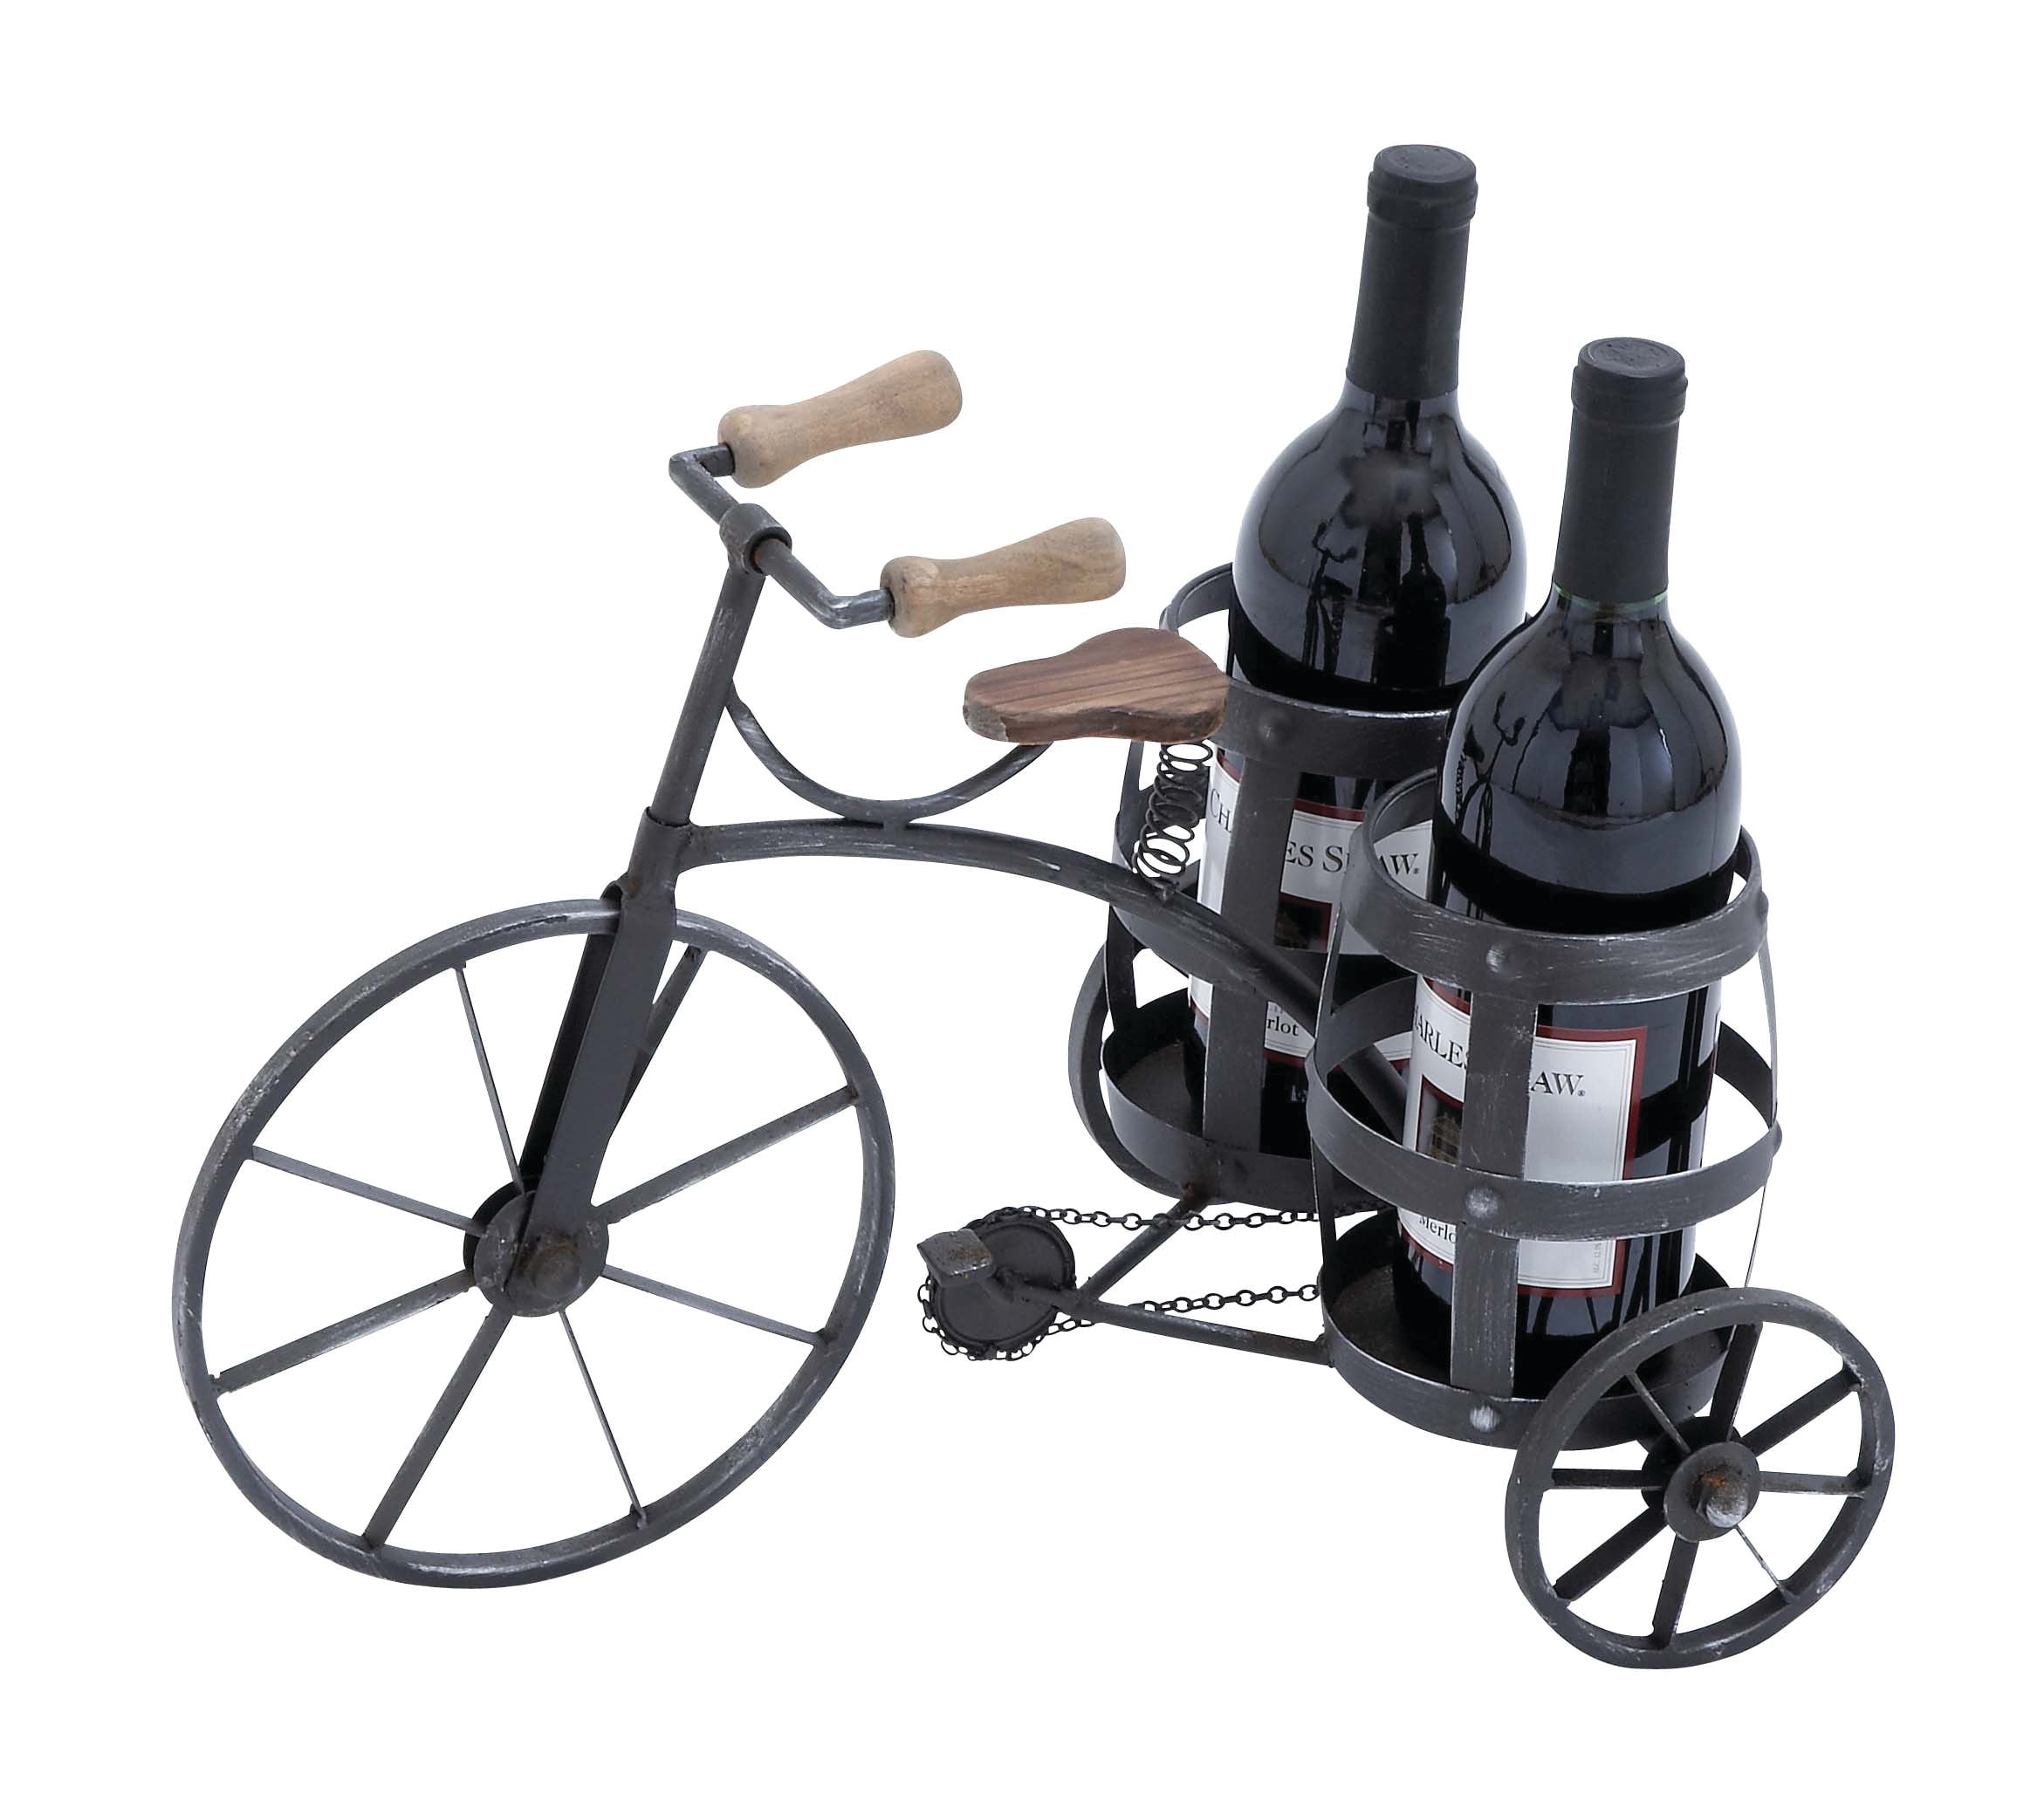 Gnome with Flowers Riding Bike Wine Bottle Holder